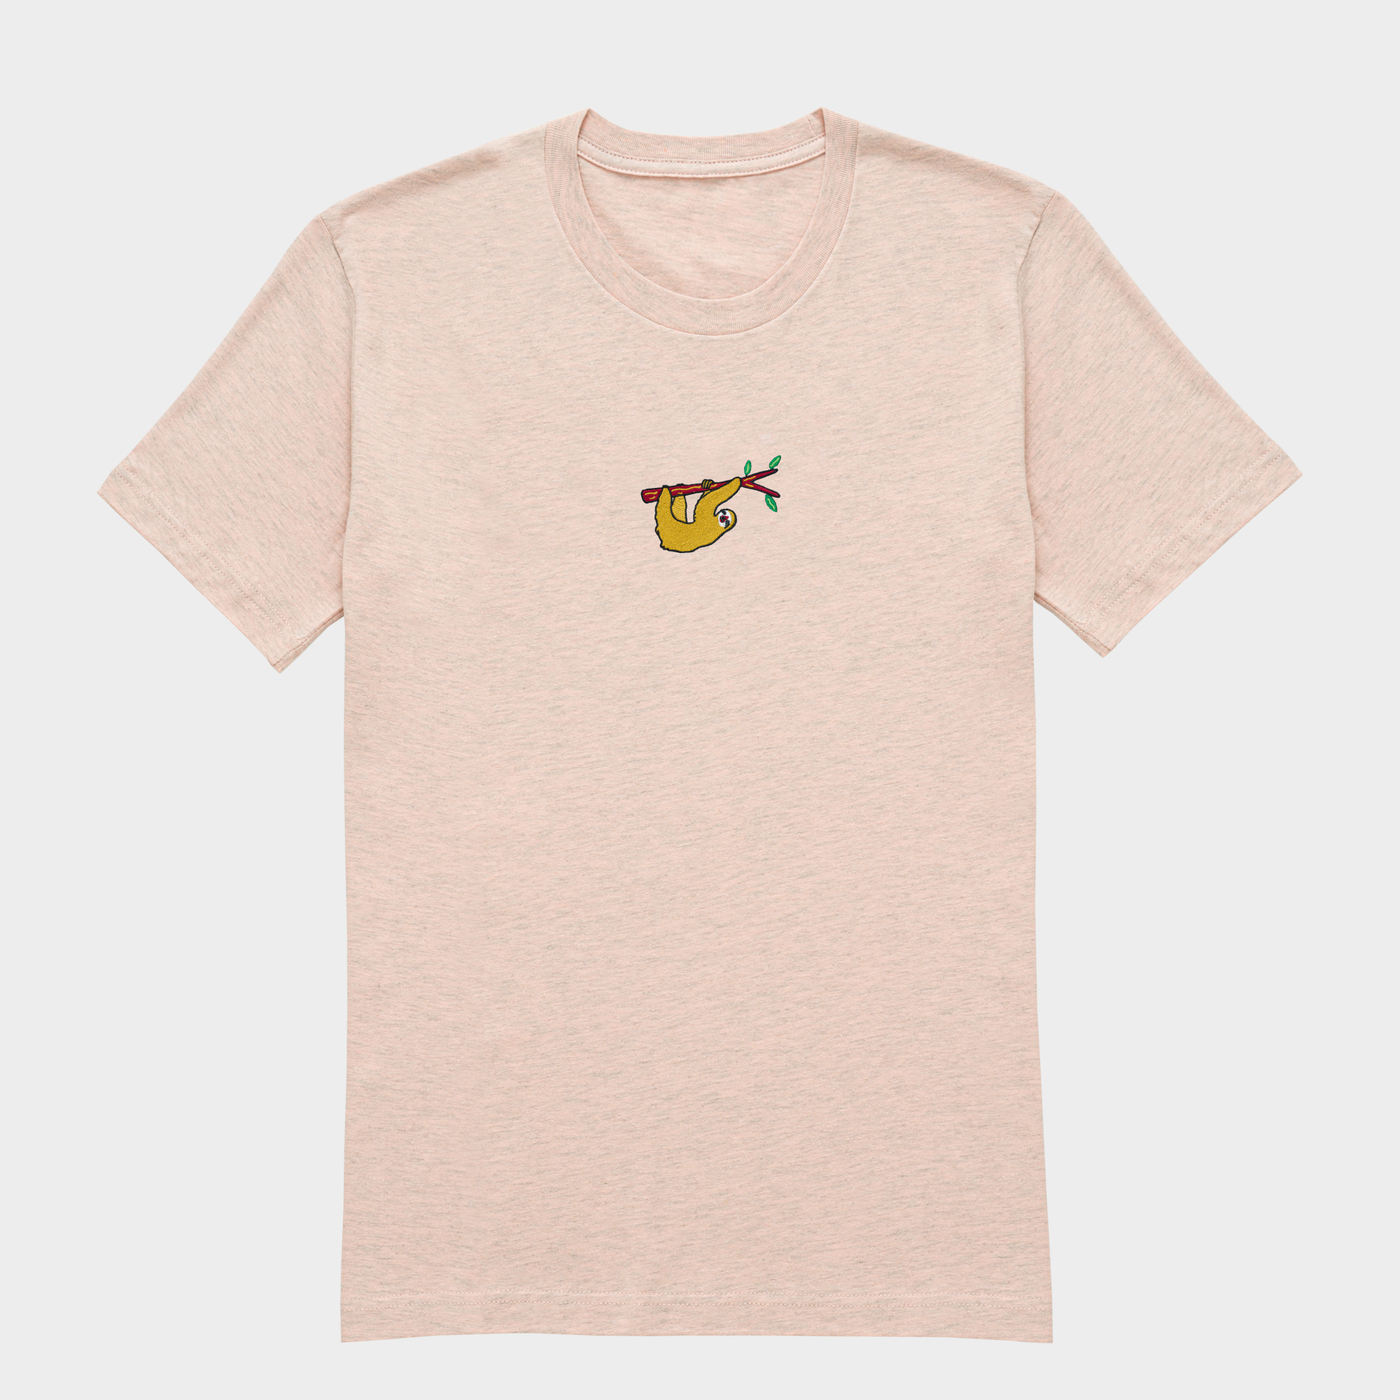 Bobby's Planet Women's Embroidered Sloth T-Shirt from South American Amazon Animals Collection in Heather Prism Peach Color#color_heather-prism-peach